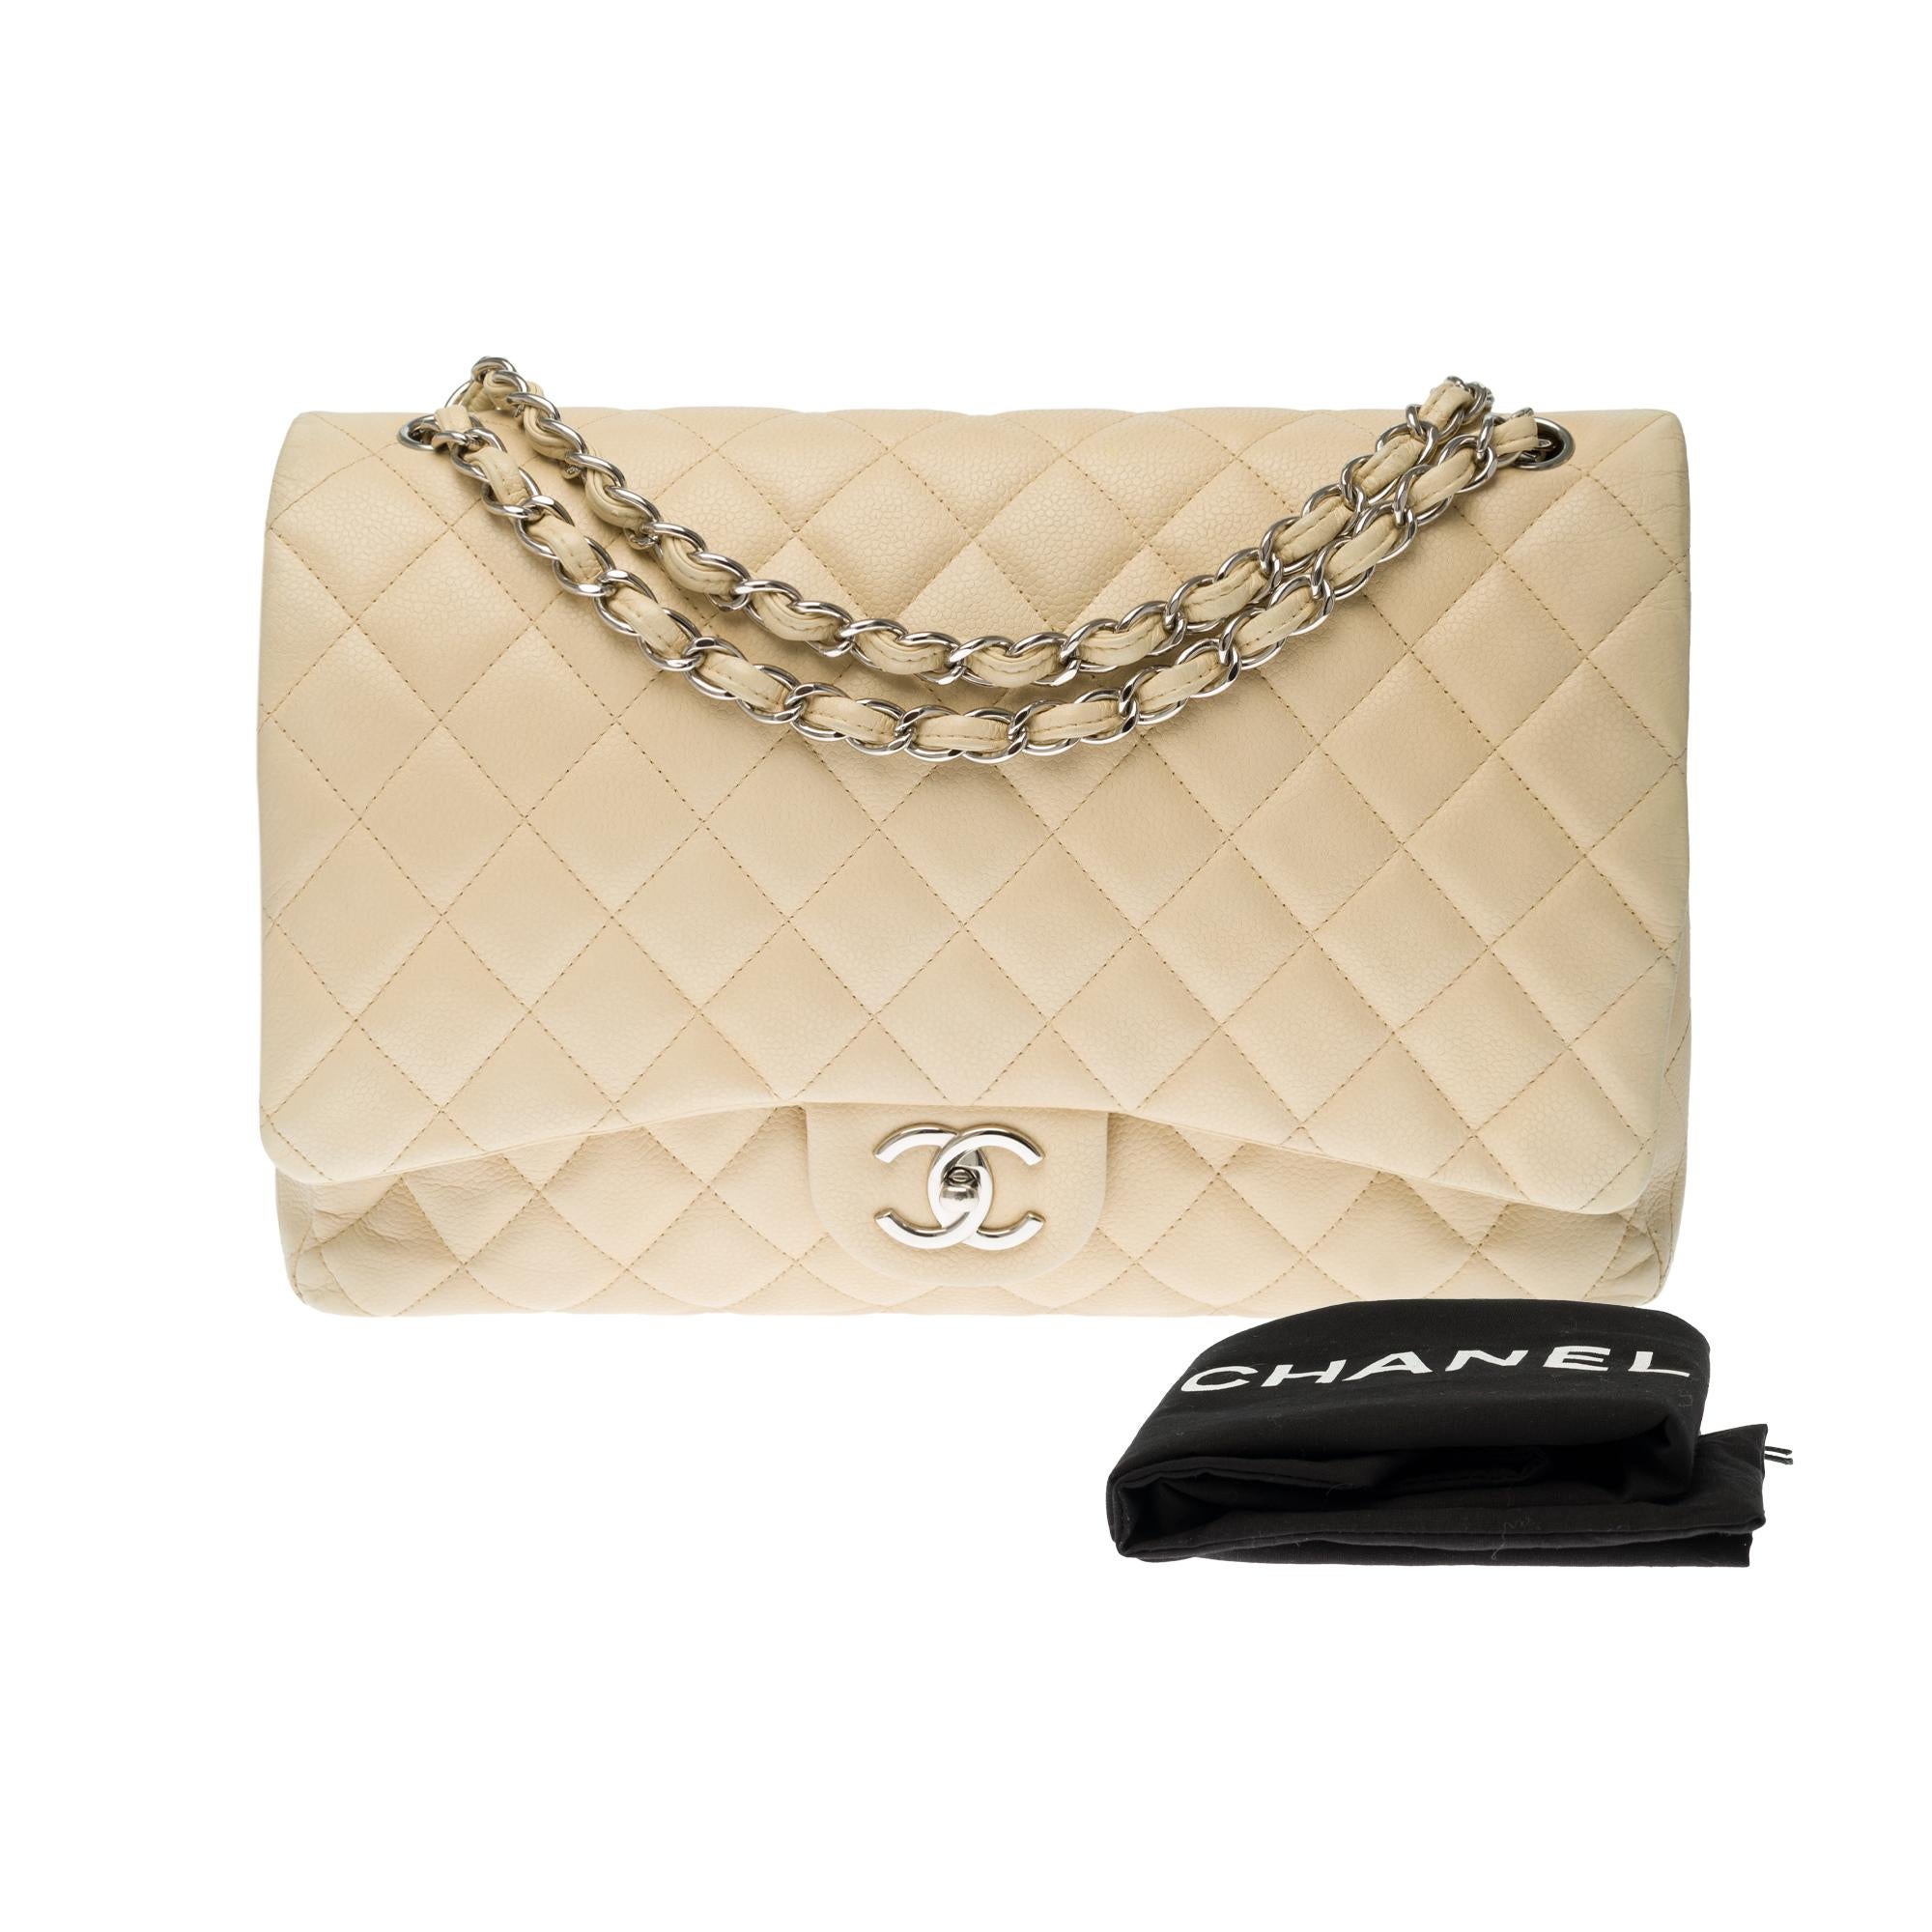 Chanel Timeless Maxi Jumbo shoulder bag in beige quilted caviar leather, SHW 6